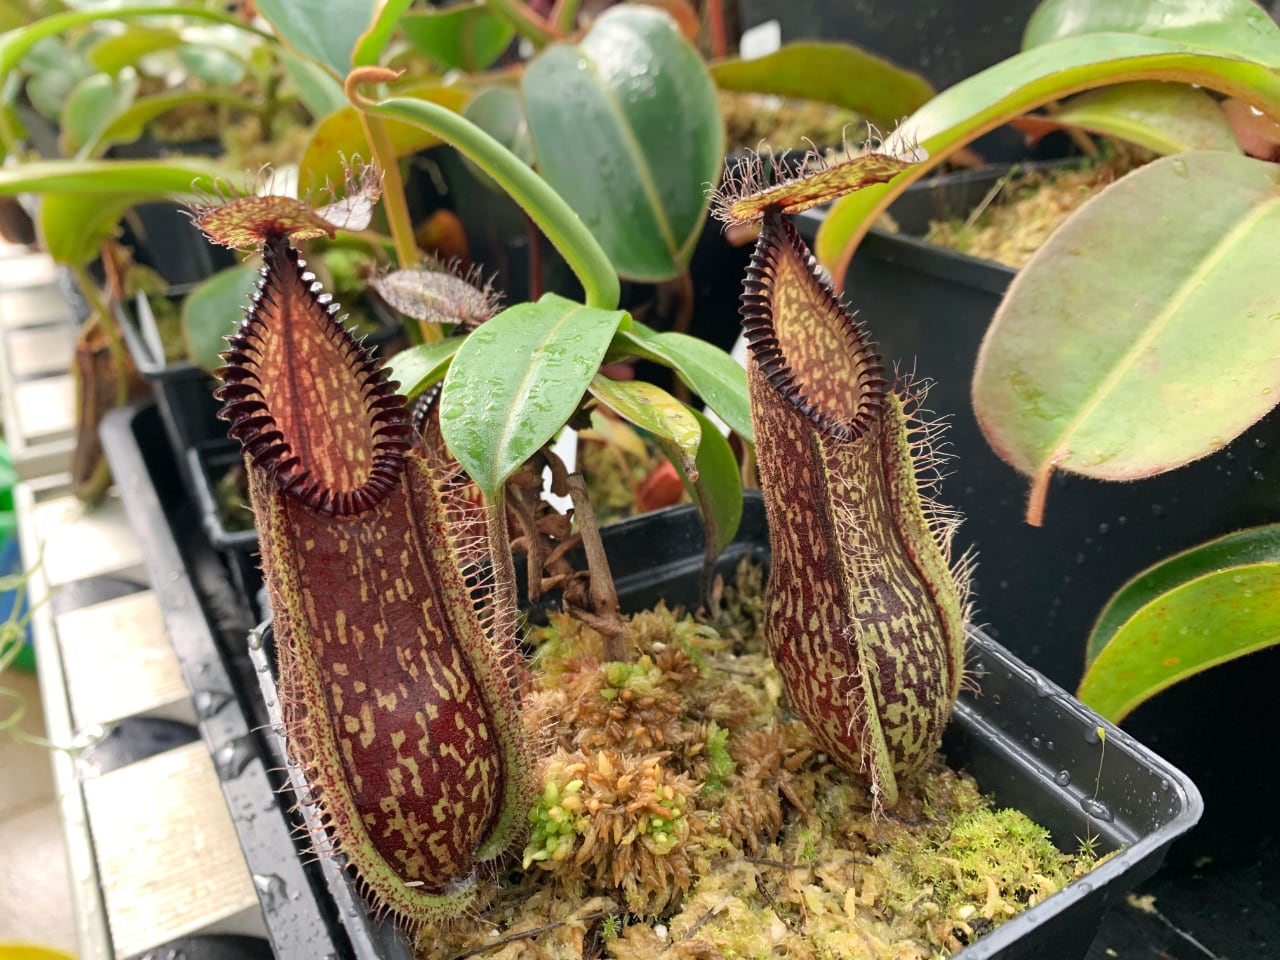 Nepenthes hamata, a tropical pitcher plant which grows year-round in my greenhouse.